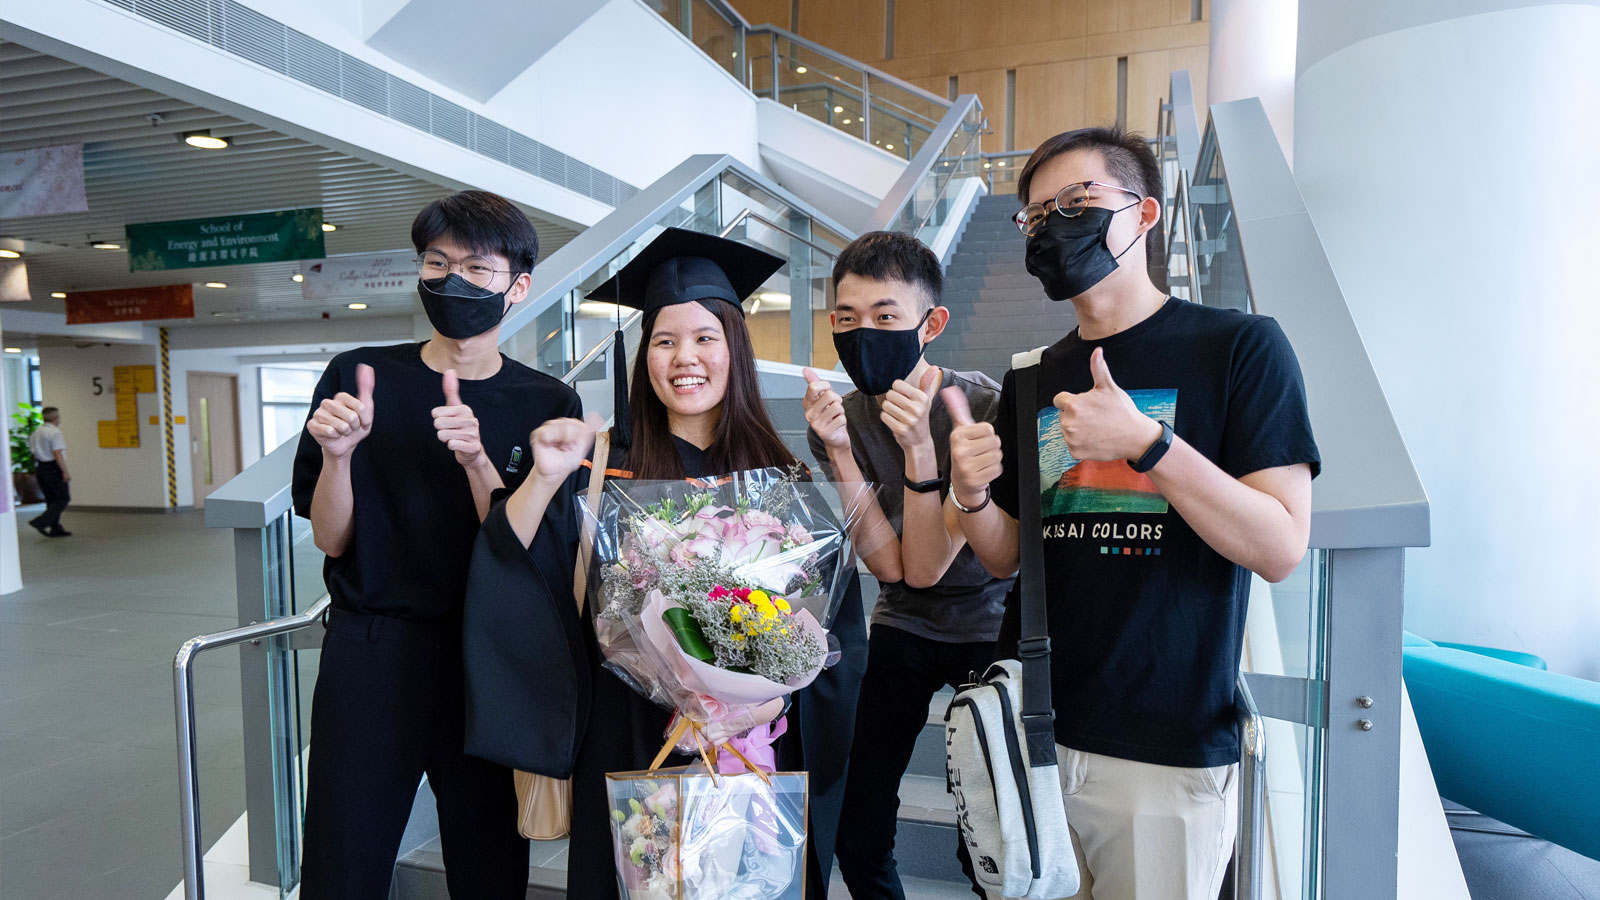 College of Business hosts Commencement for 2021 graduates